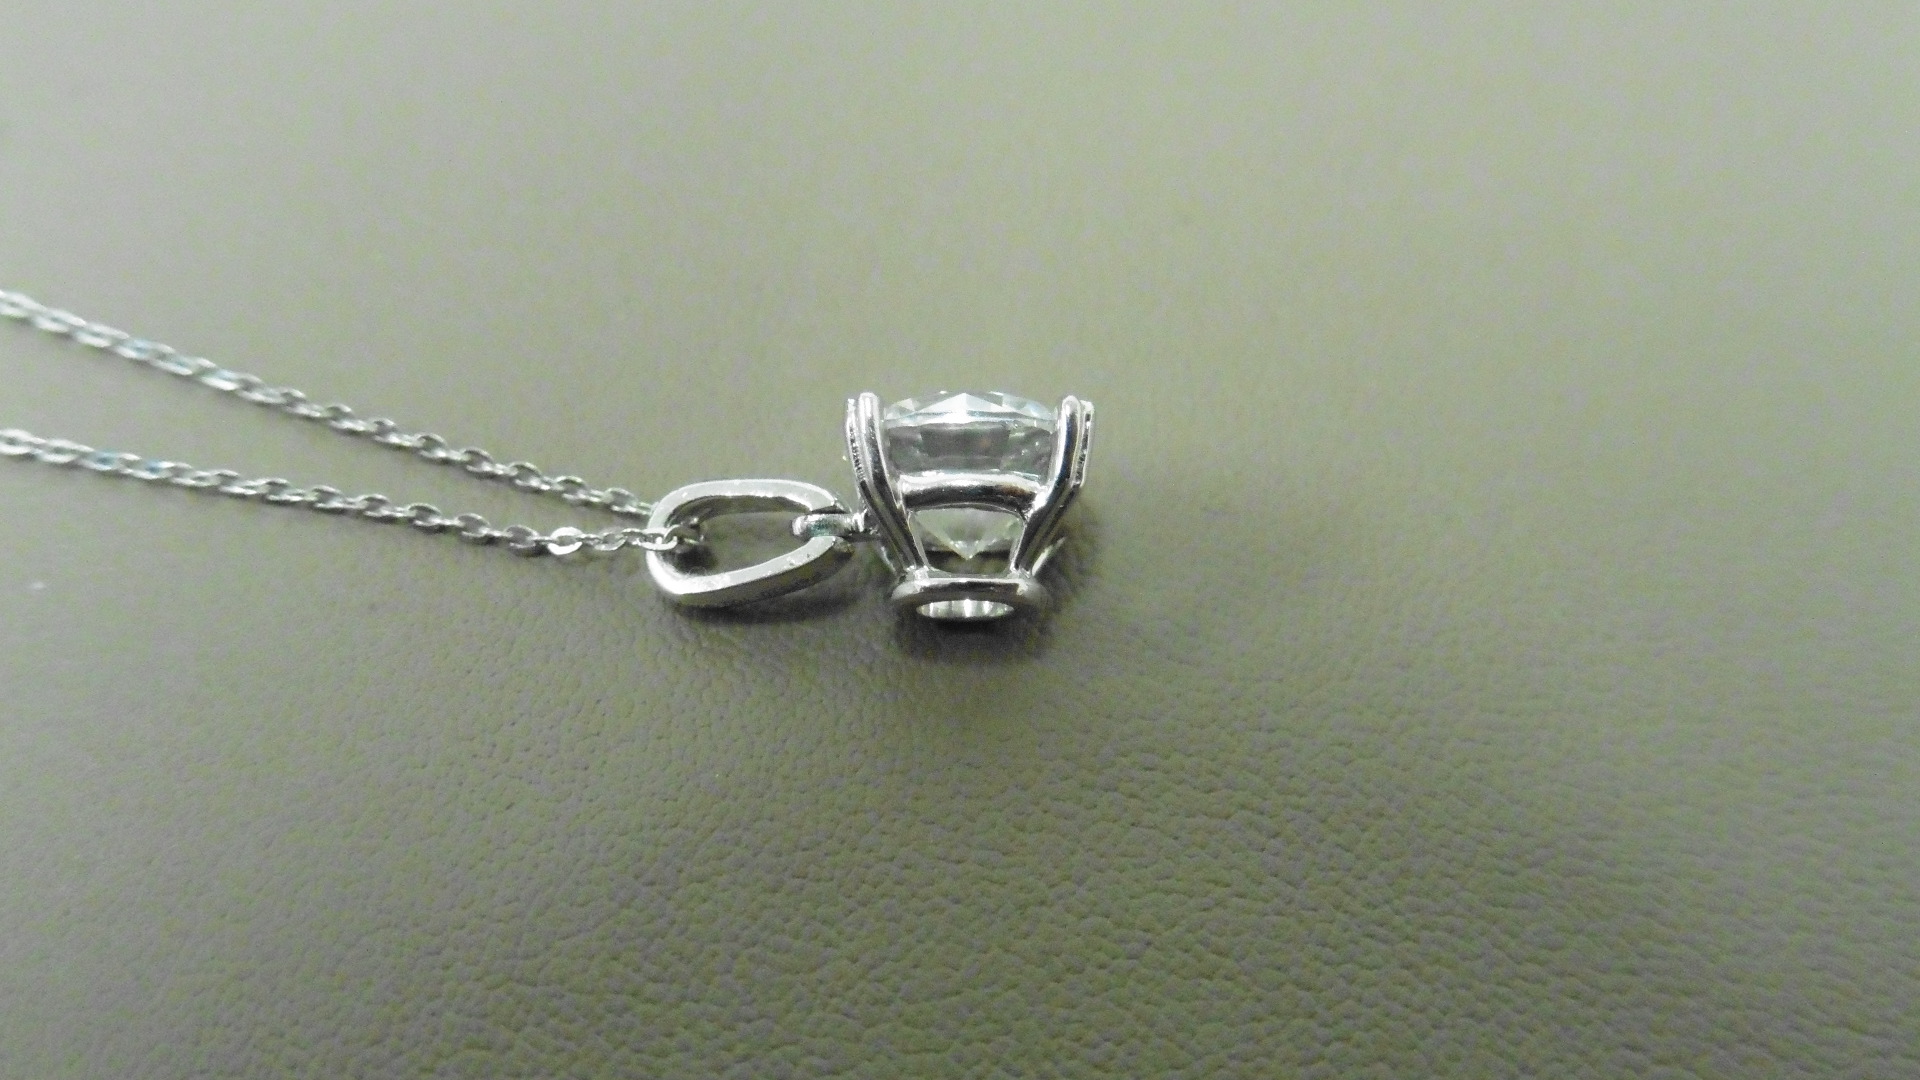 1.00ct diamond solitaire style pendant. Brilliant cut diamond, H colour and si3 clarity. Set in a - Image 3 of 4